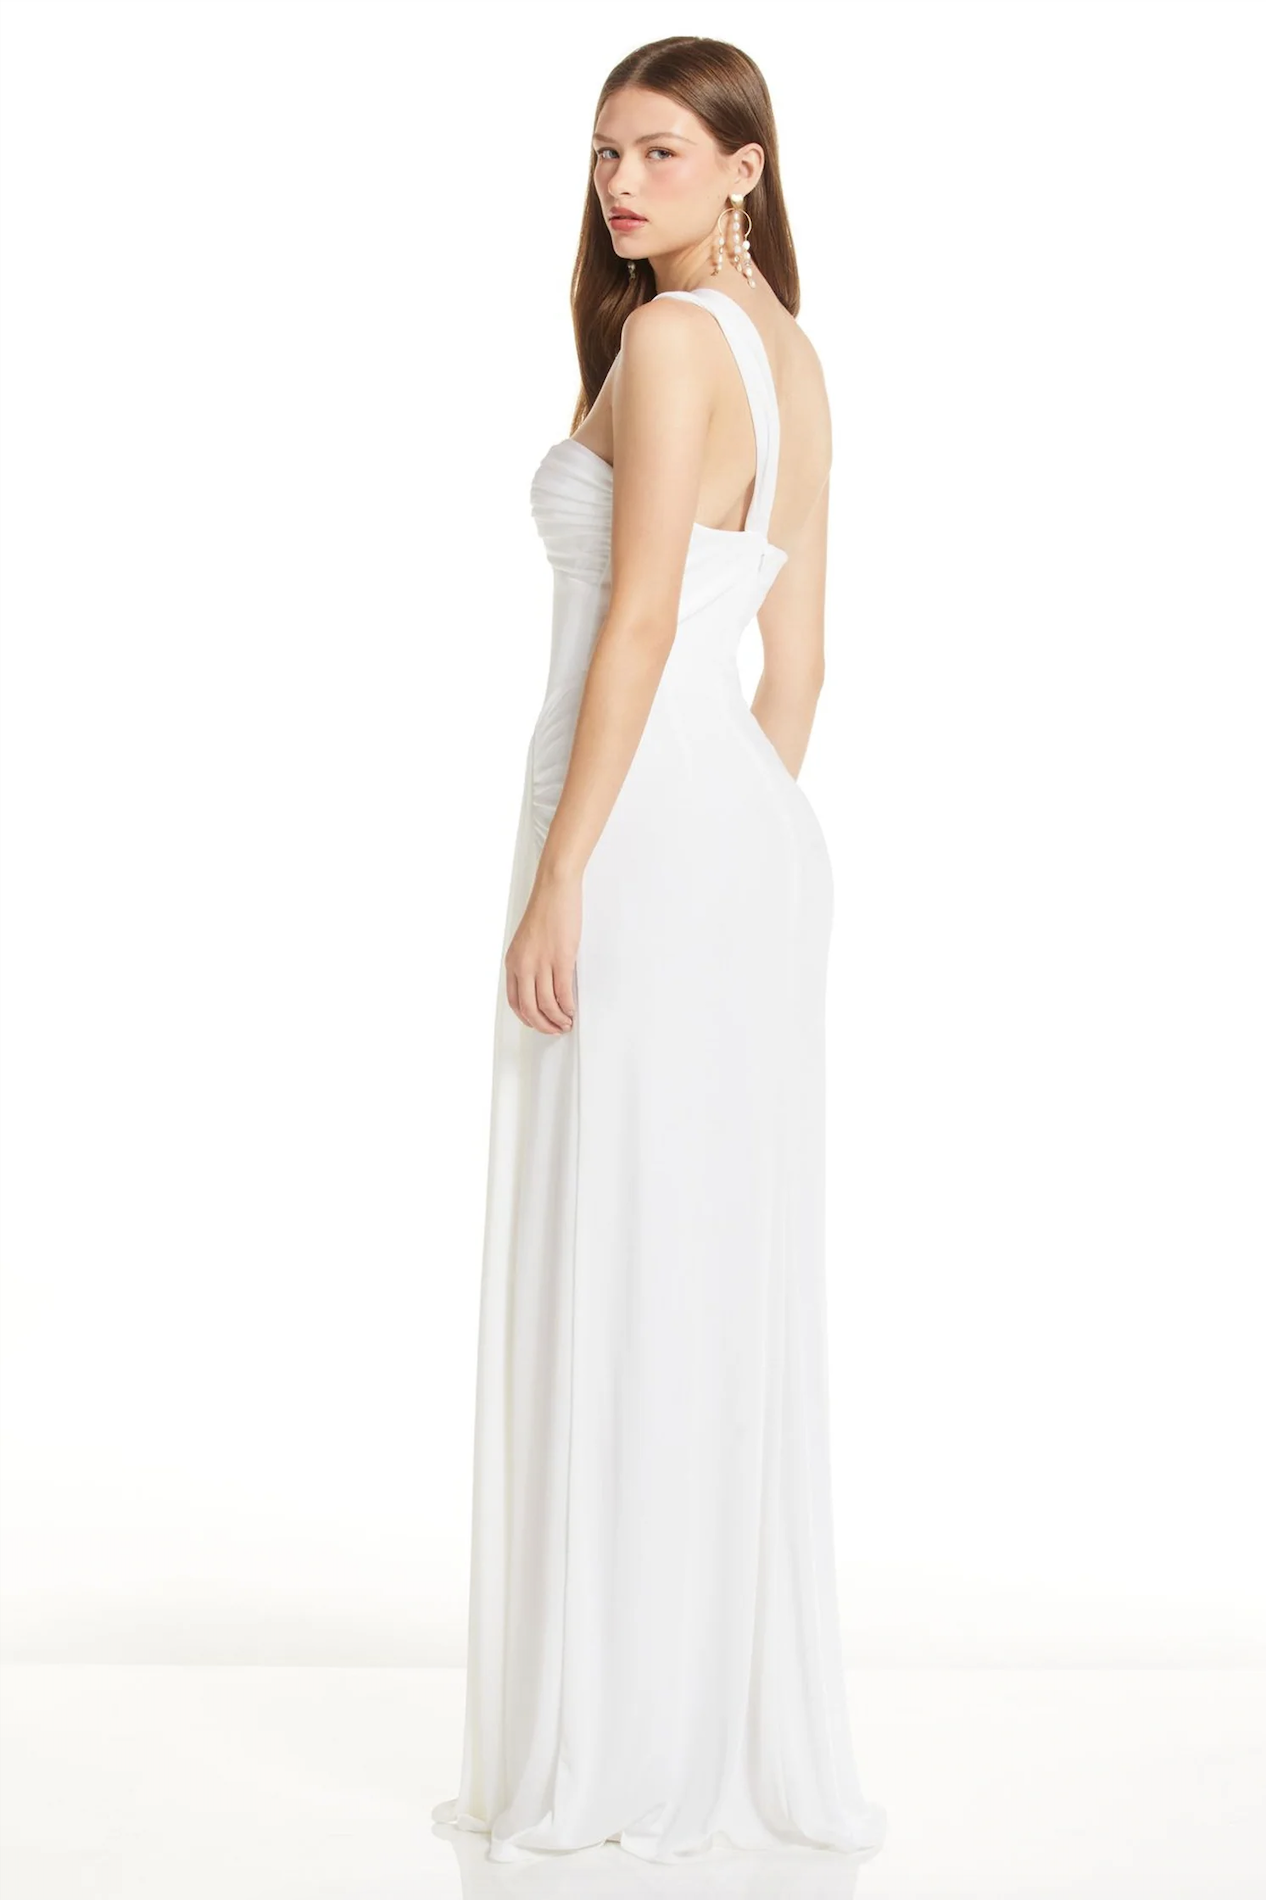 KATIE MAY KATIE MAY CARTER ASYMMETRICAL NK GOWN/DRESSES